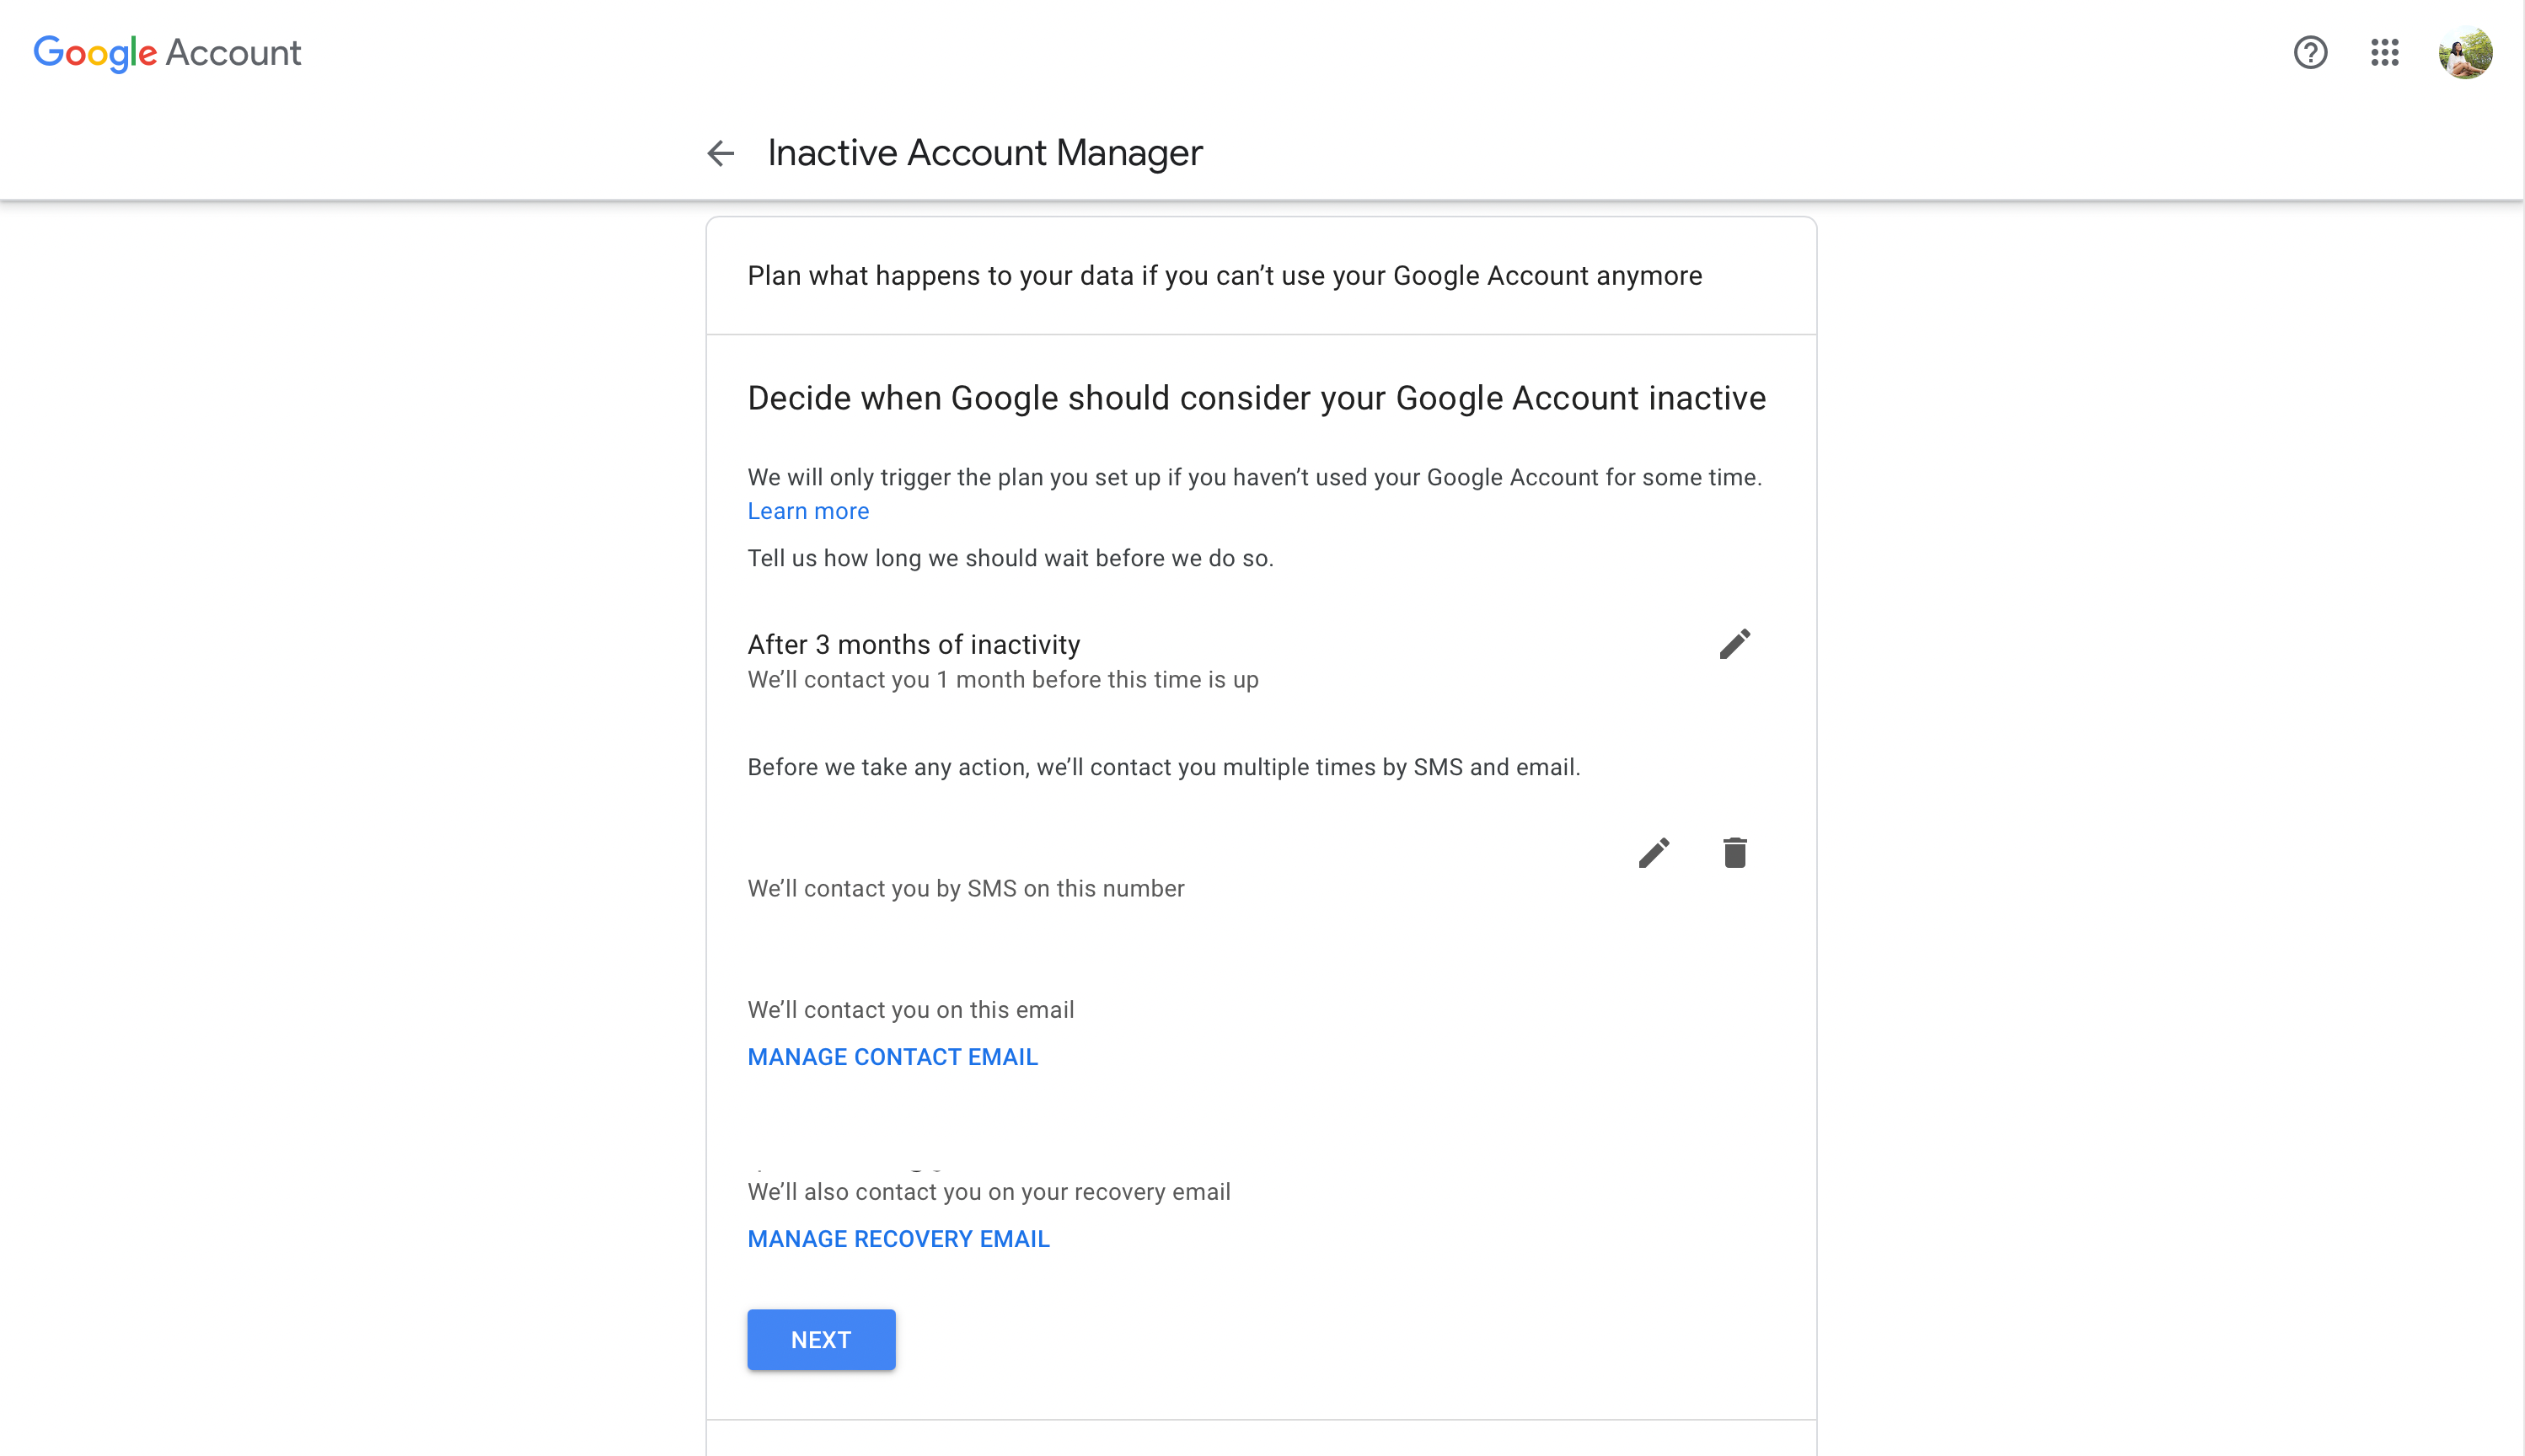 Decide when Google Determines Your Account as Inactive